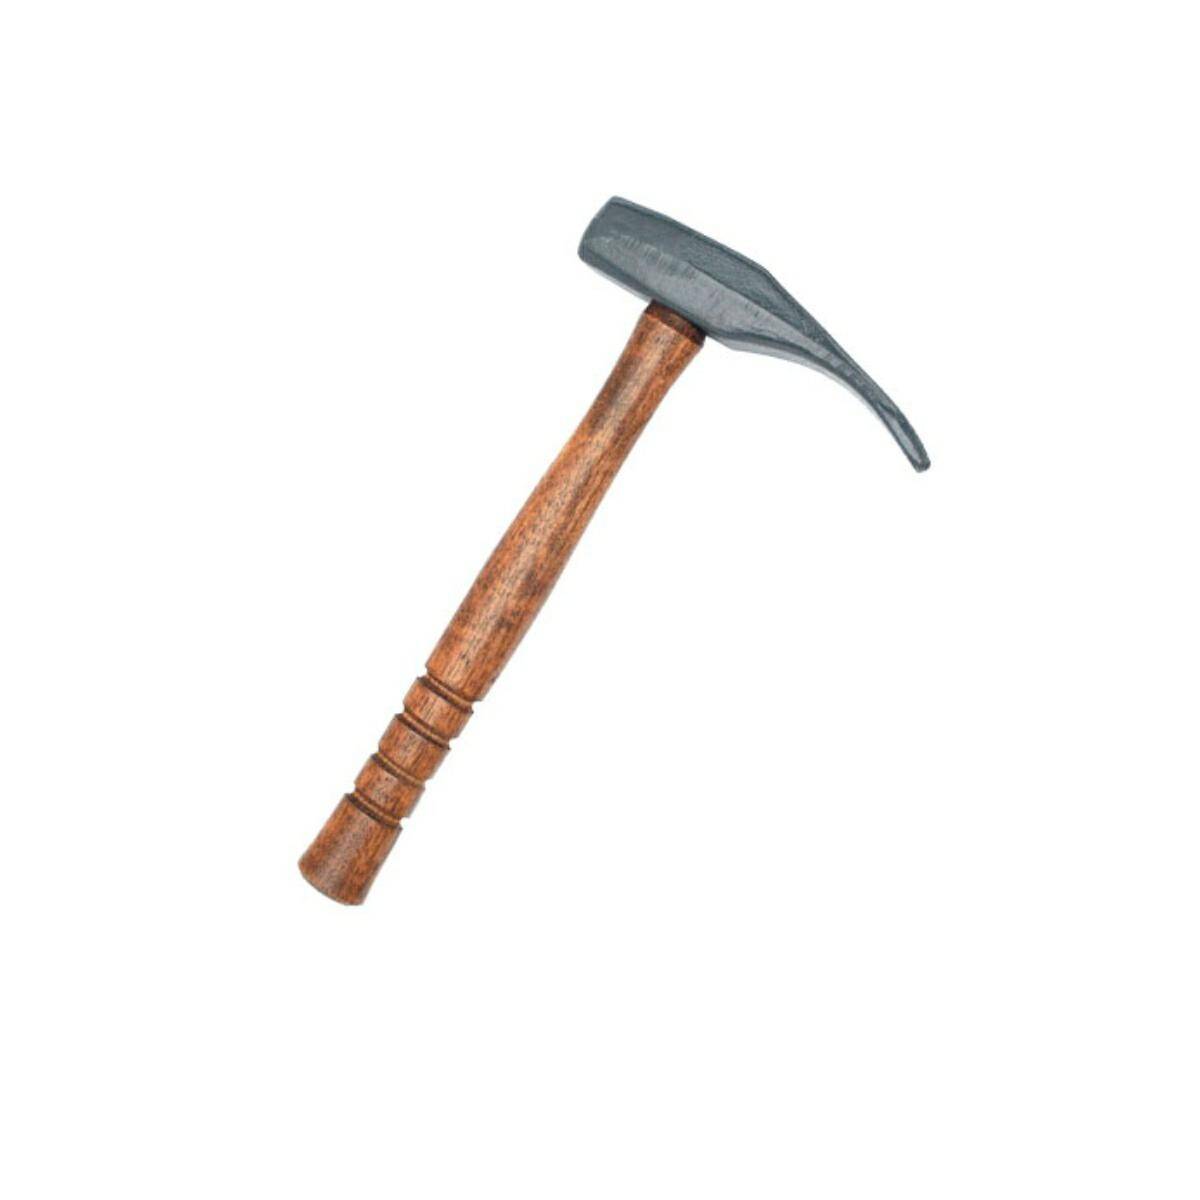 Ken-Tool T11D hammer with a wooden handle